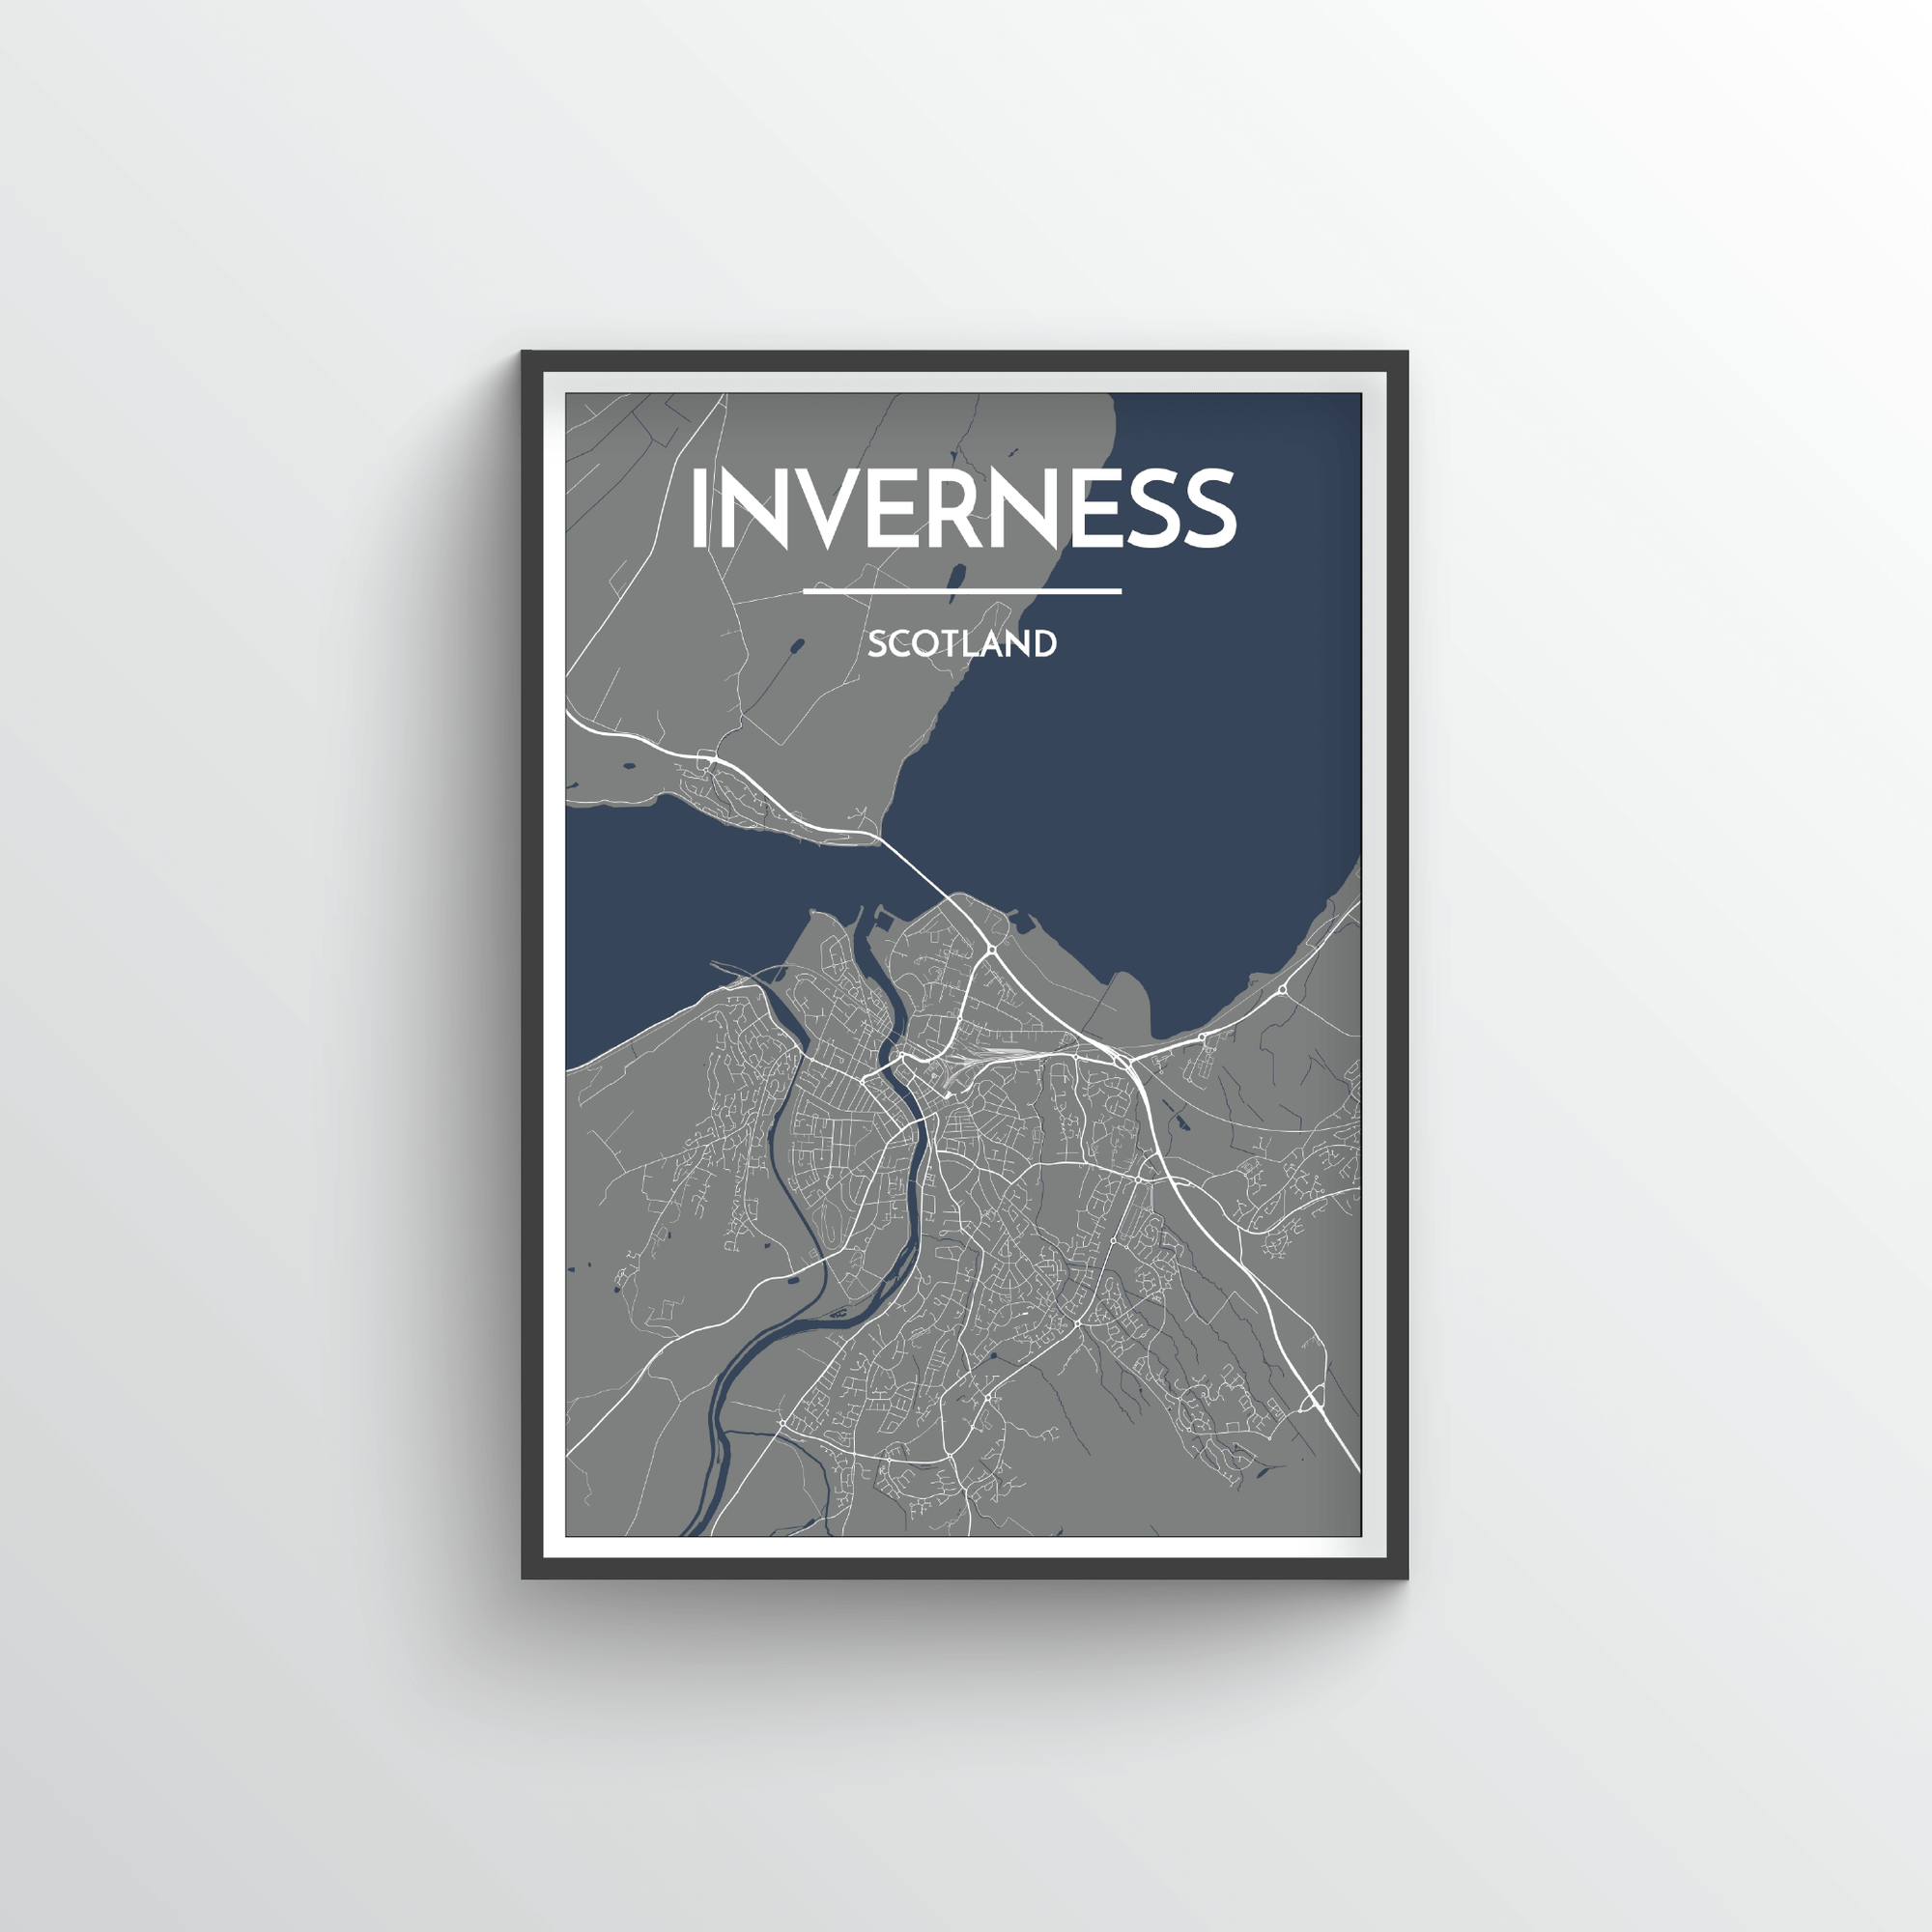 Inverness City Art Prints - High Quality Custom Made Point Two Design